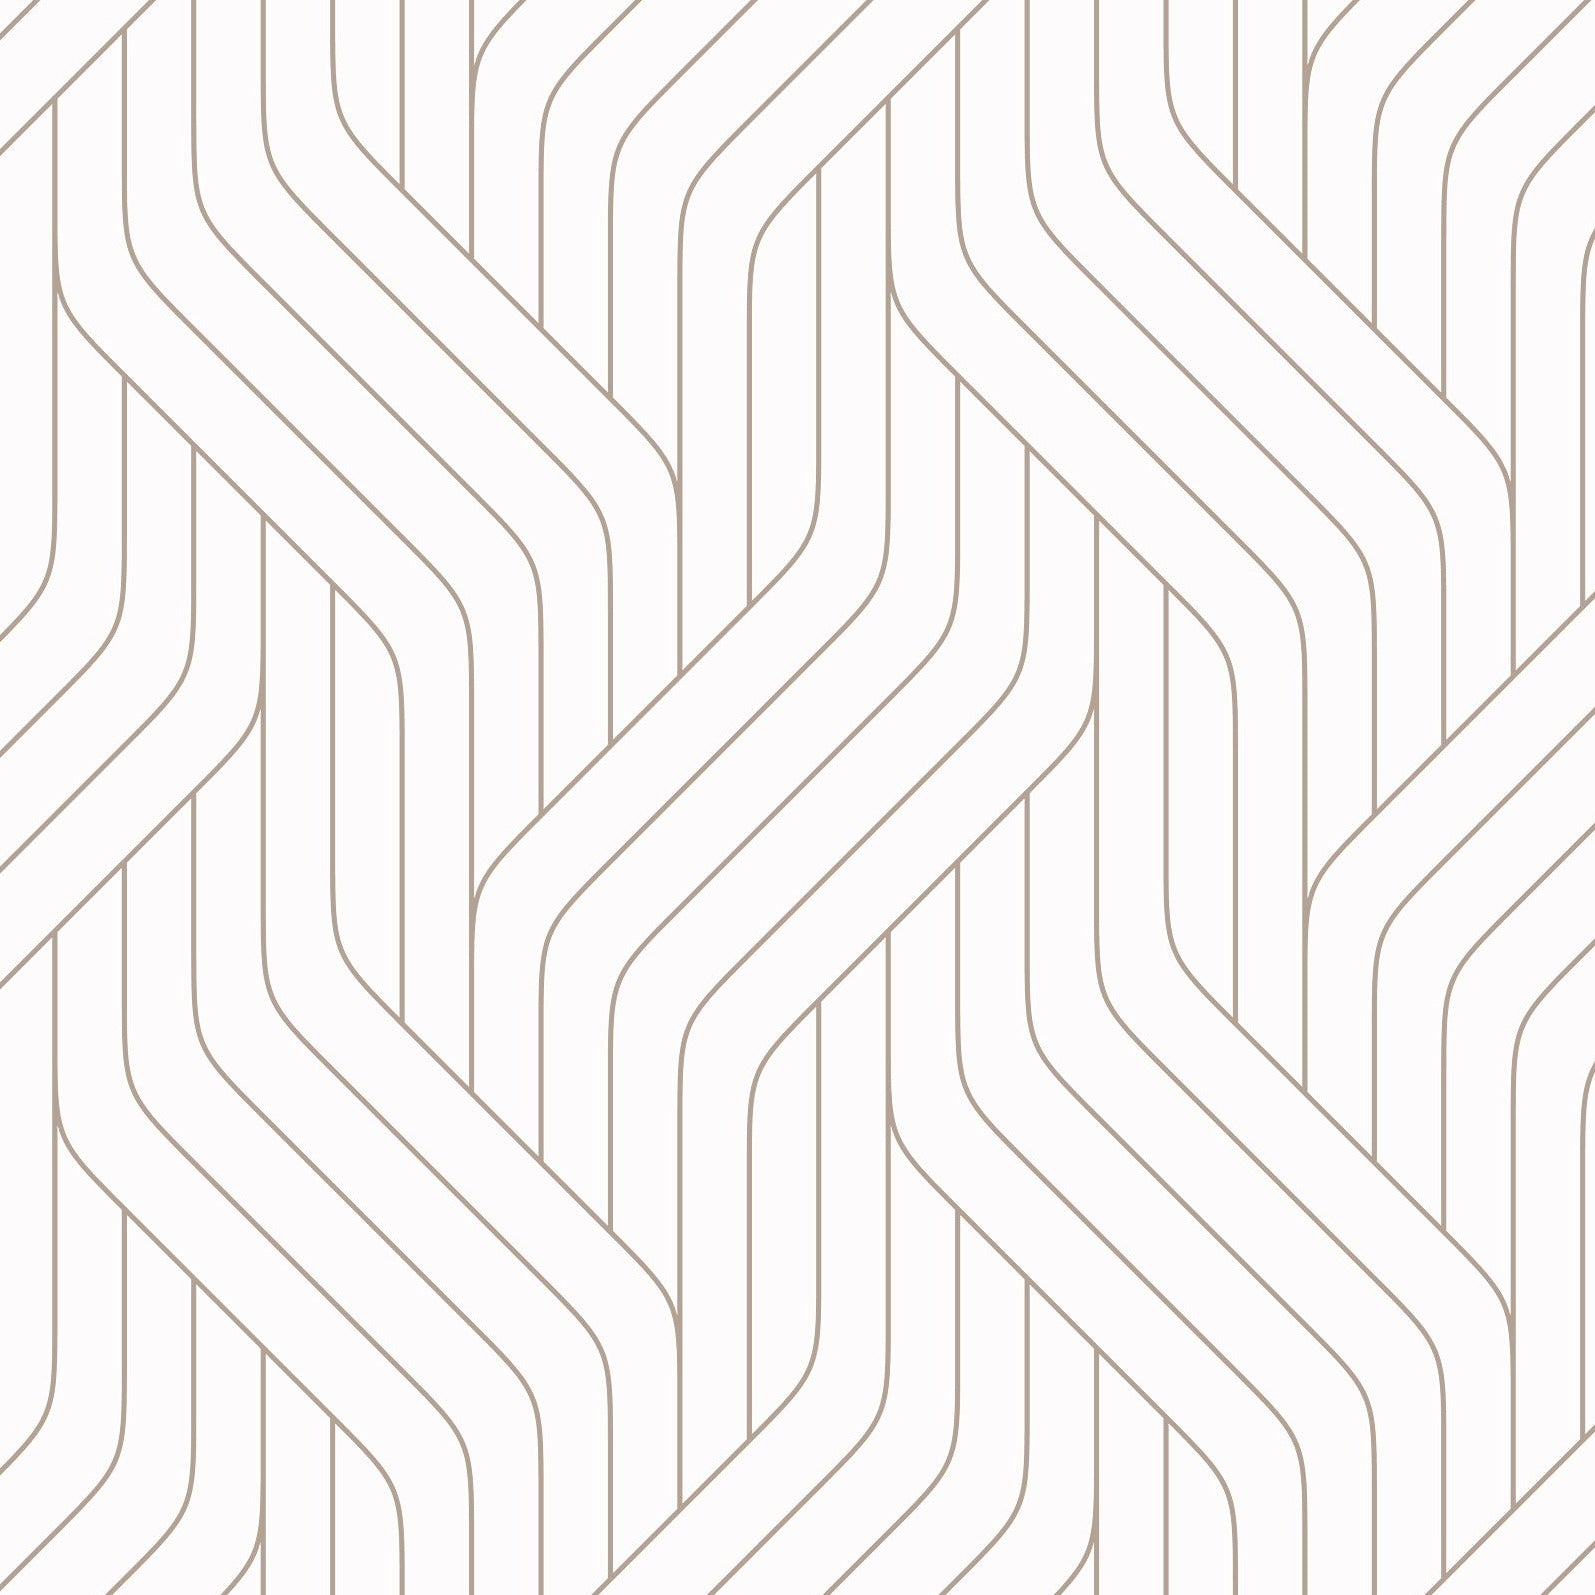 Close-up of Modern Braids Wallpaper pattern featuring a geometric braided design in beige and white.